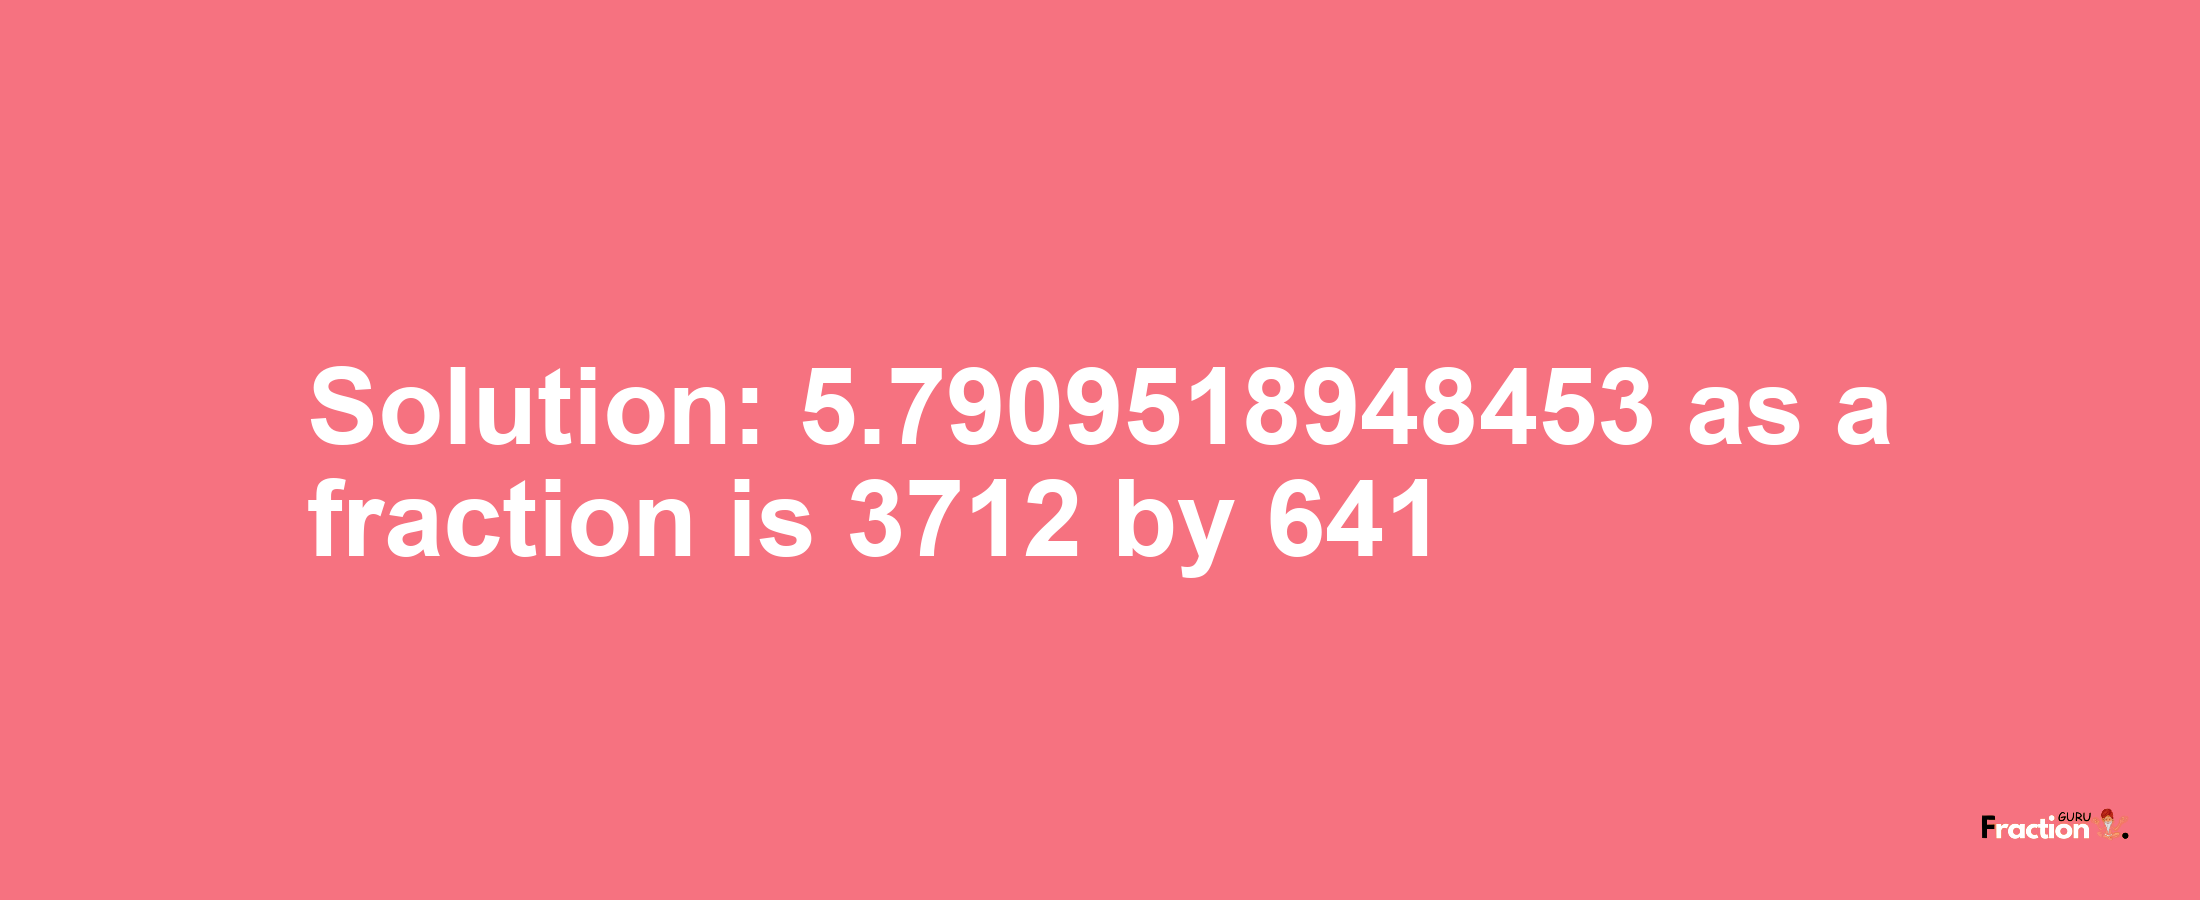 Solution:5.7909518948453 as a fraction is 3712/641